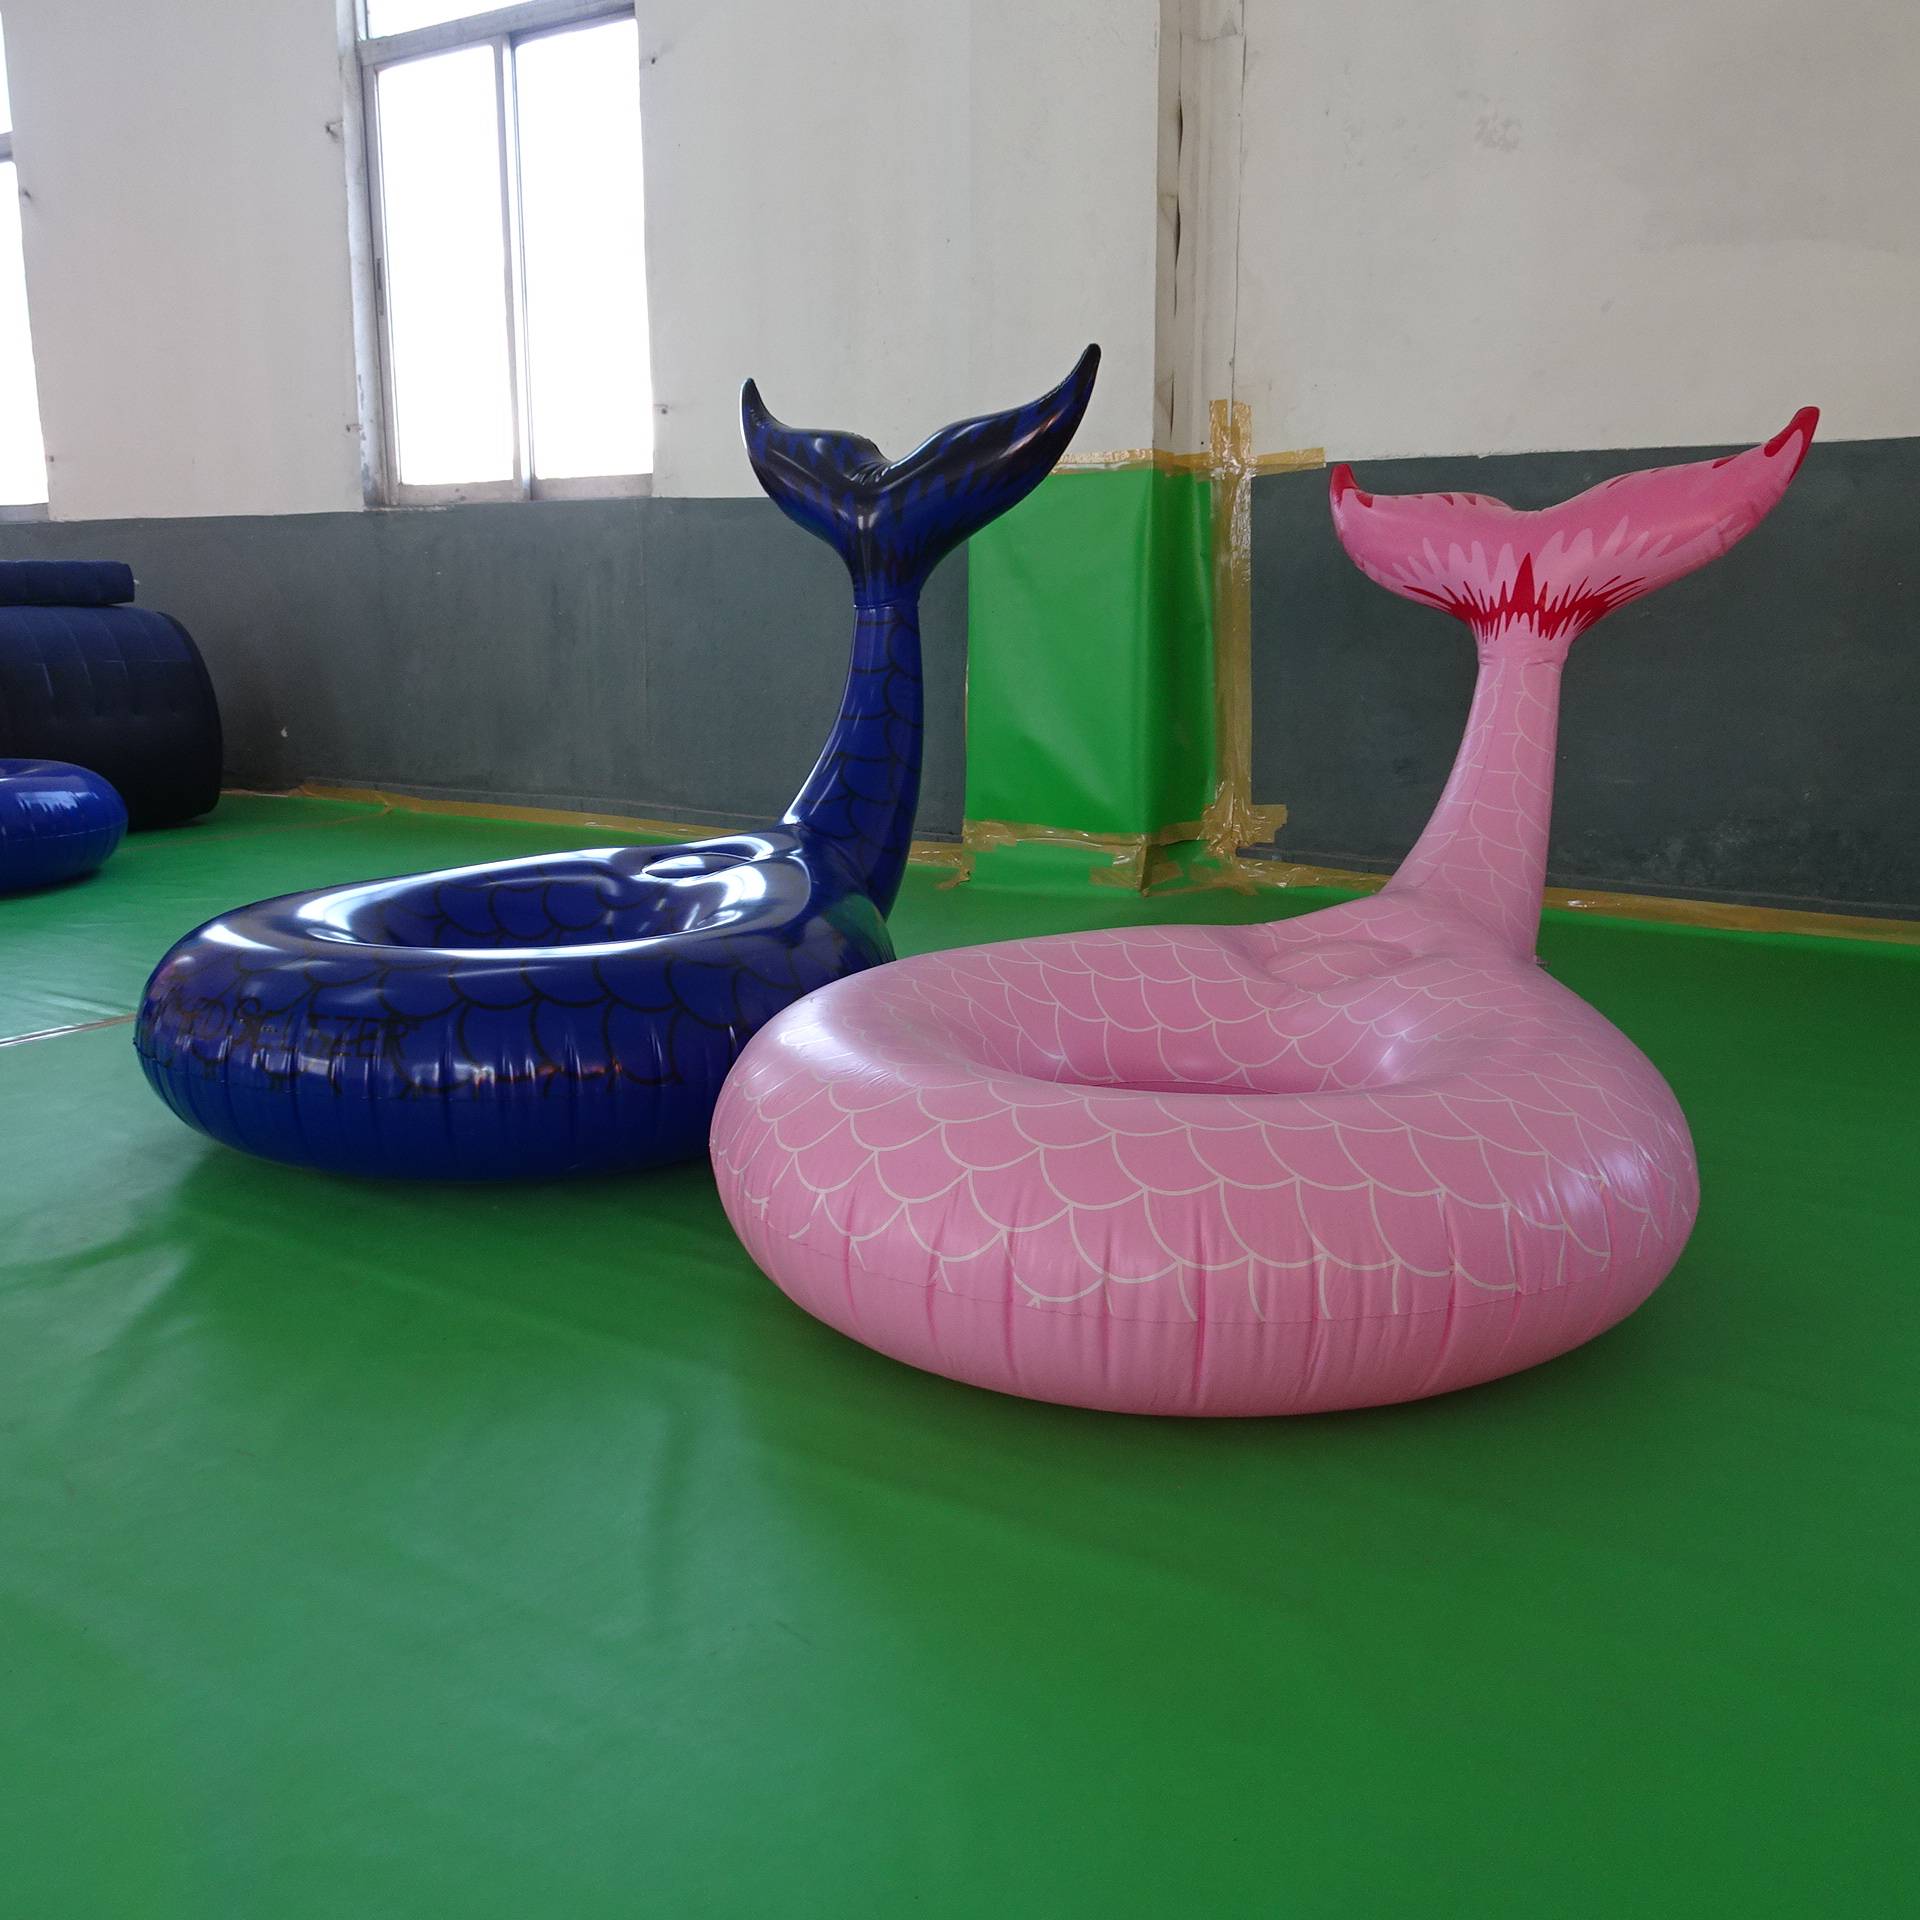 Customised Inflatable Mermaid Swimming Pool Floating Rings For Younger Kids And Toddlers